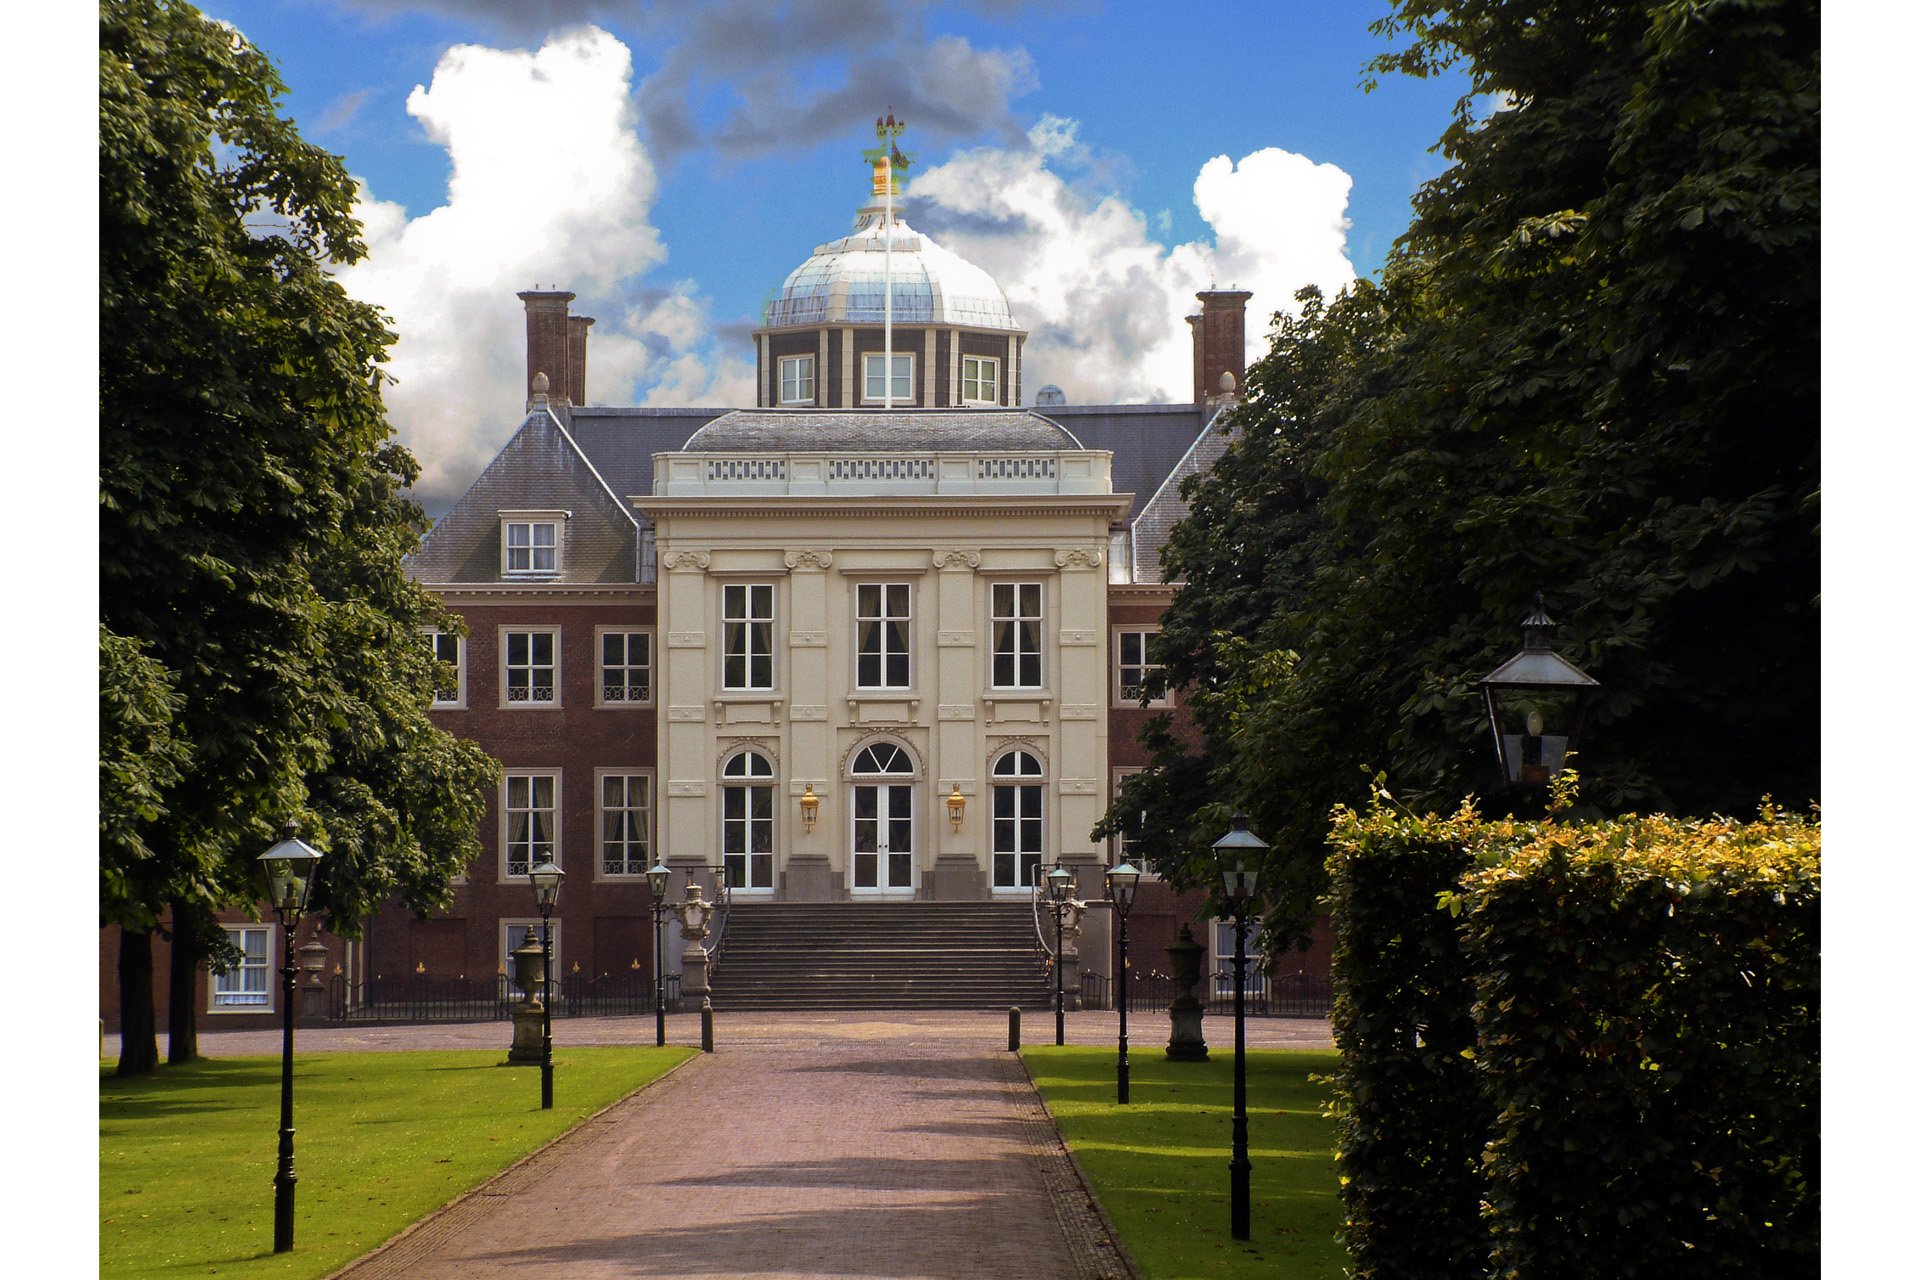 Huis ten Bosch in The Hague, one of three official residences of the Dutch monarch, the two others being the Noordeinde Palace in The Hague and the Royal Palace in Amsterdam